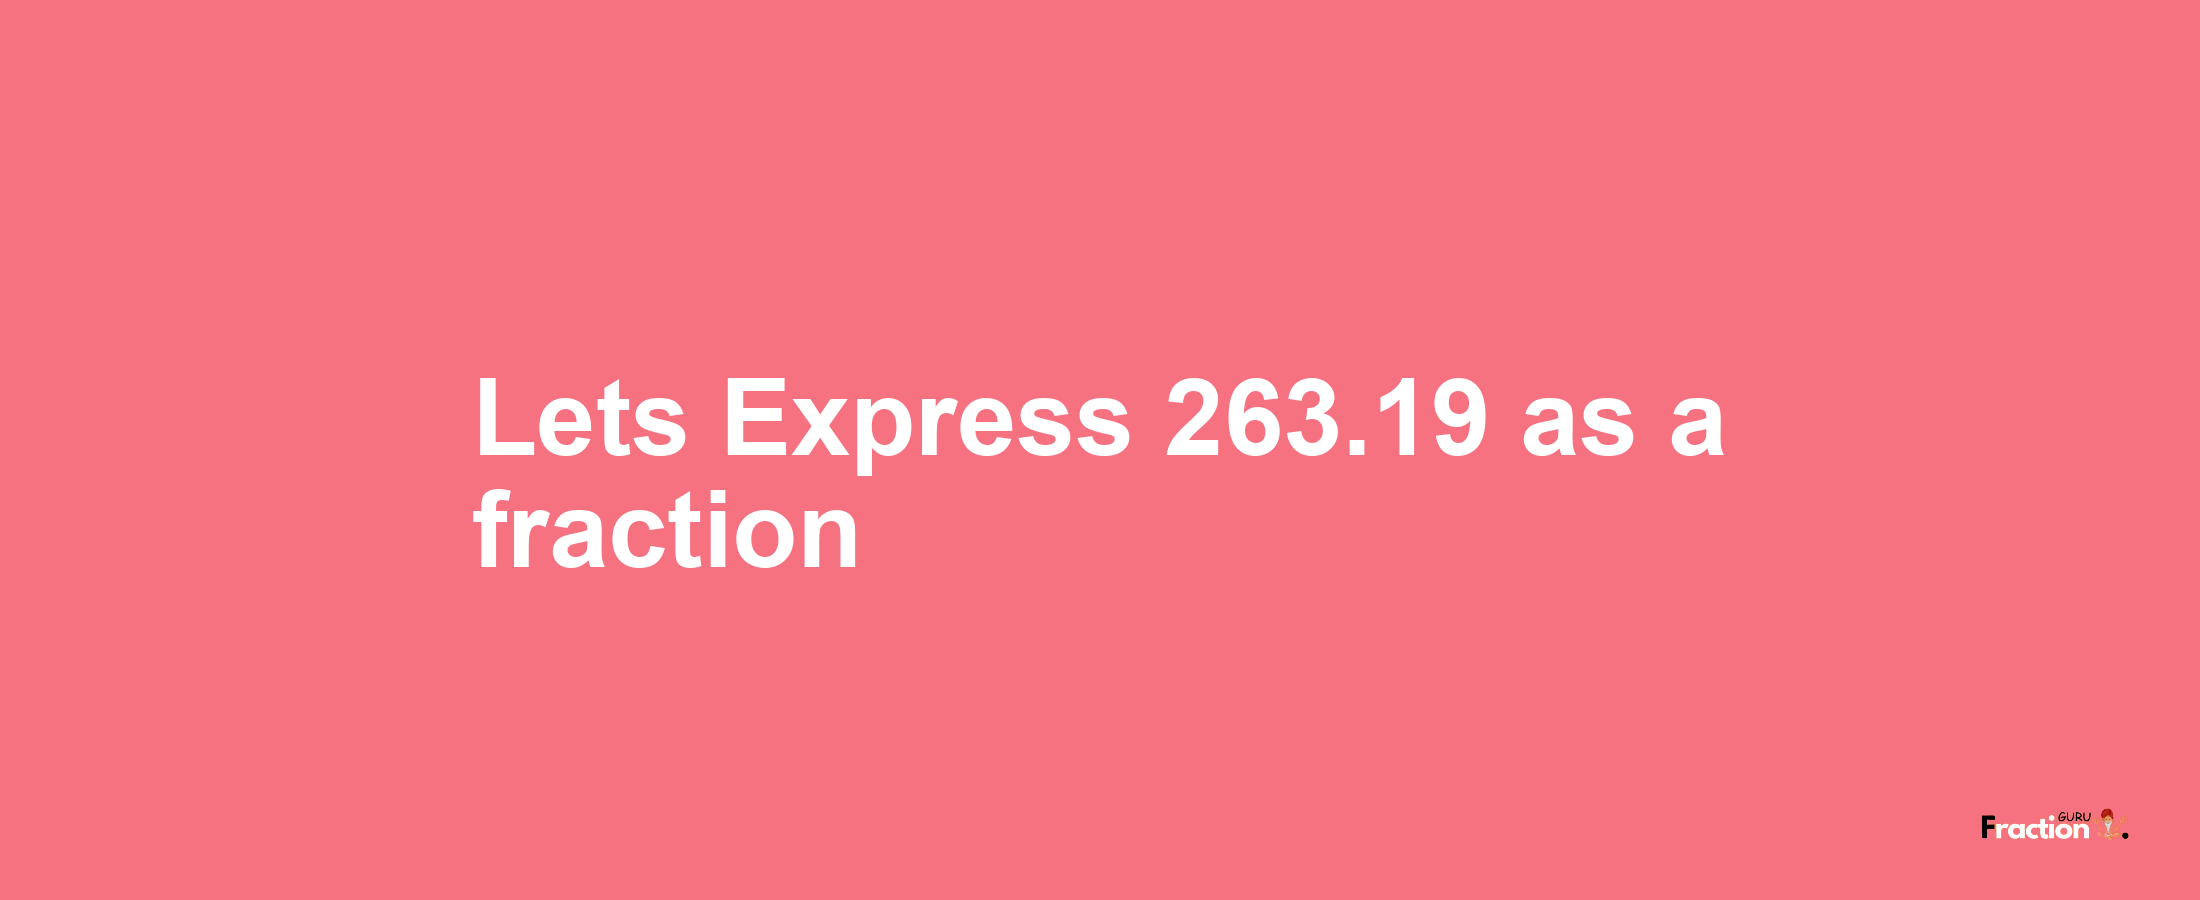 Lets Express 263.19 as afraction